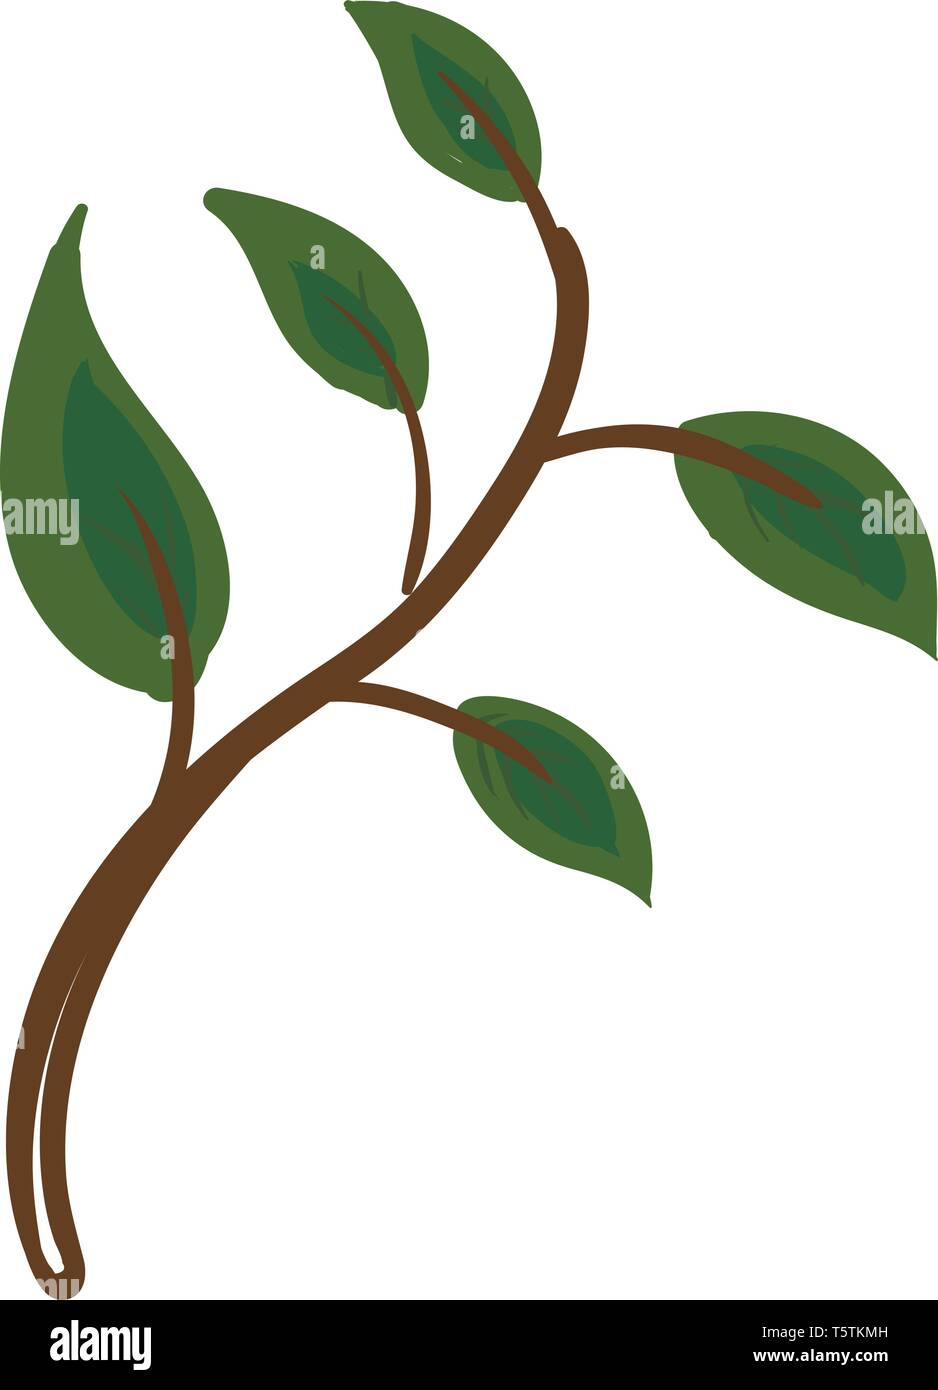 The picture of green leaves that have flat surfaces and blunt tips vector color drawing or illustration Stock Vector